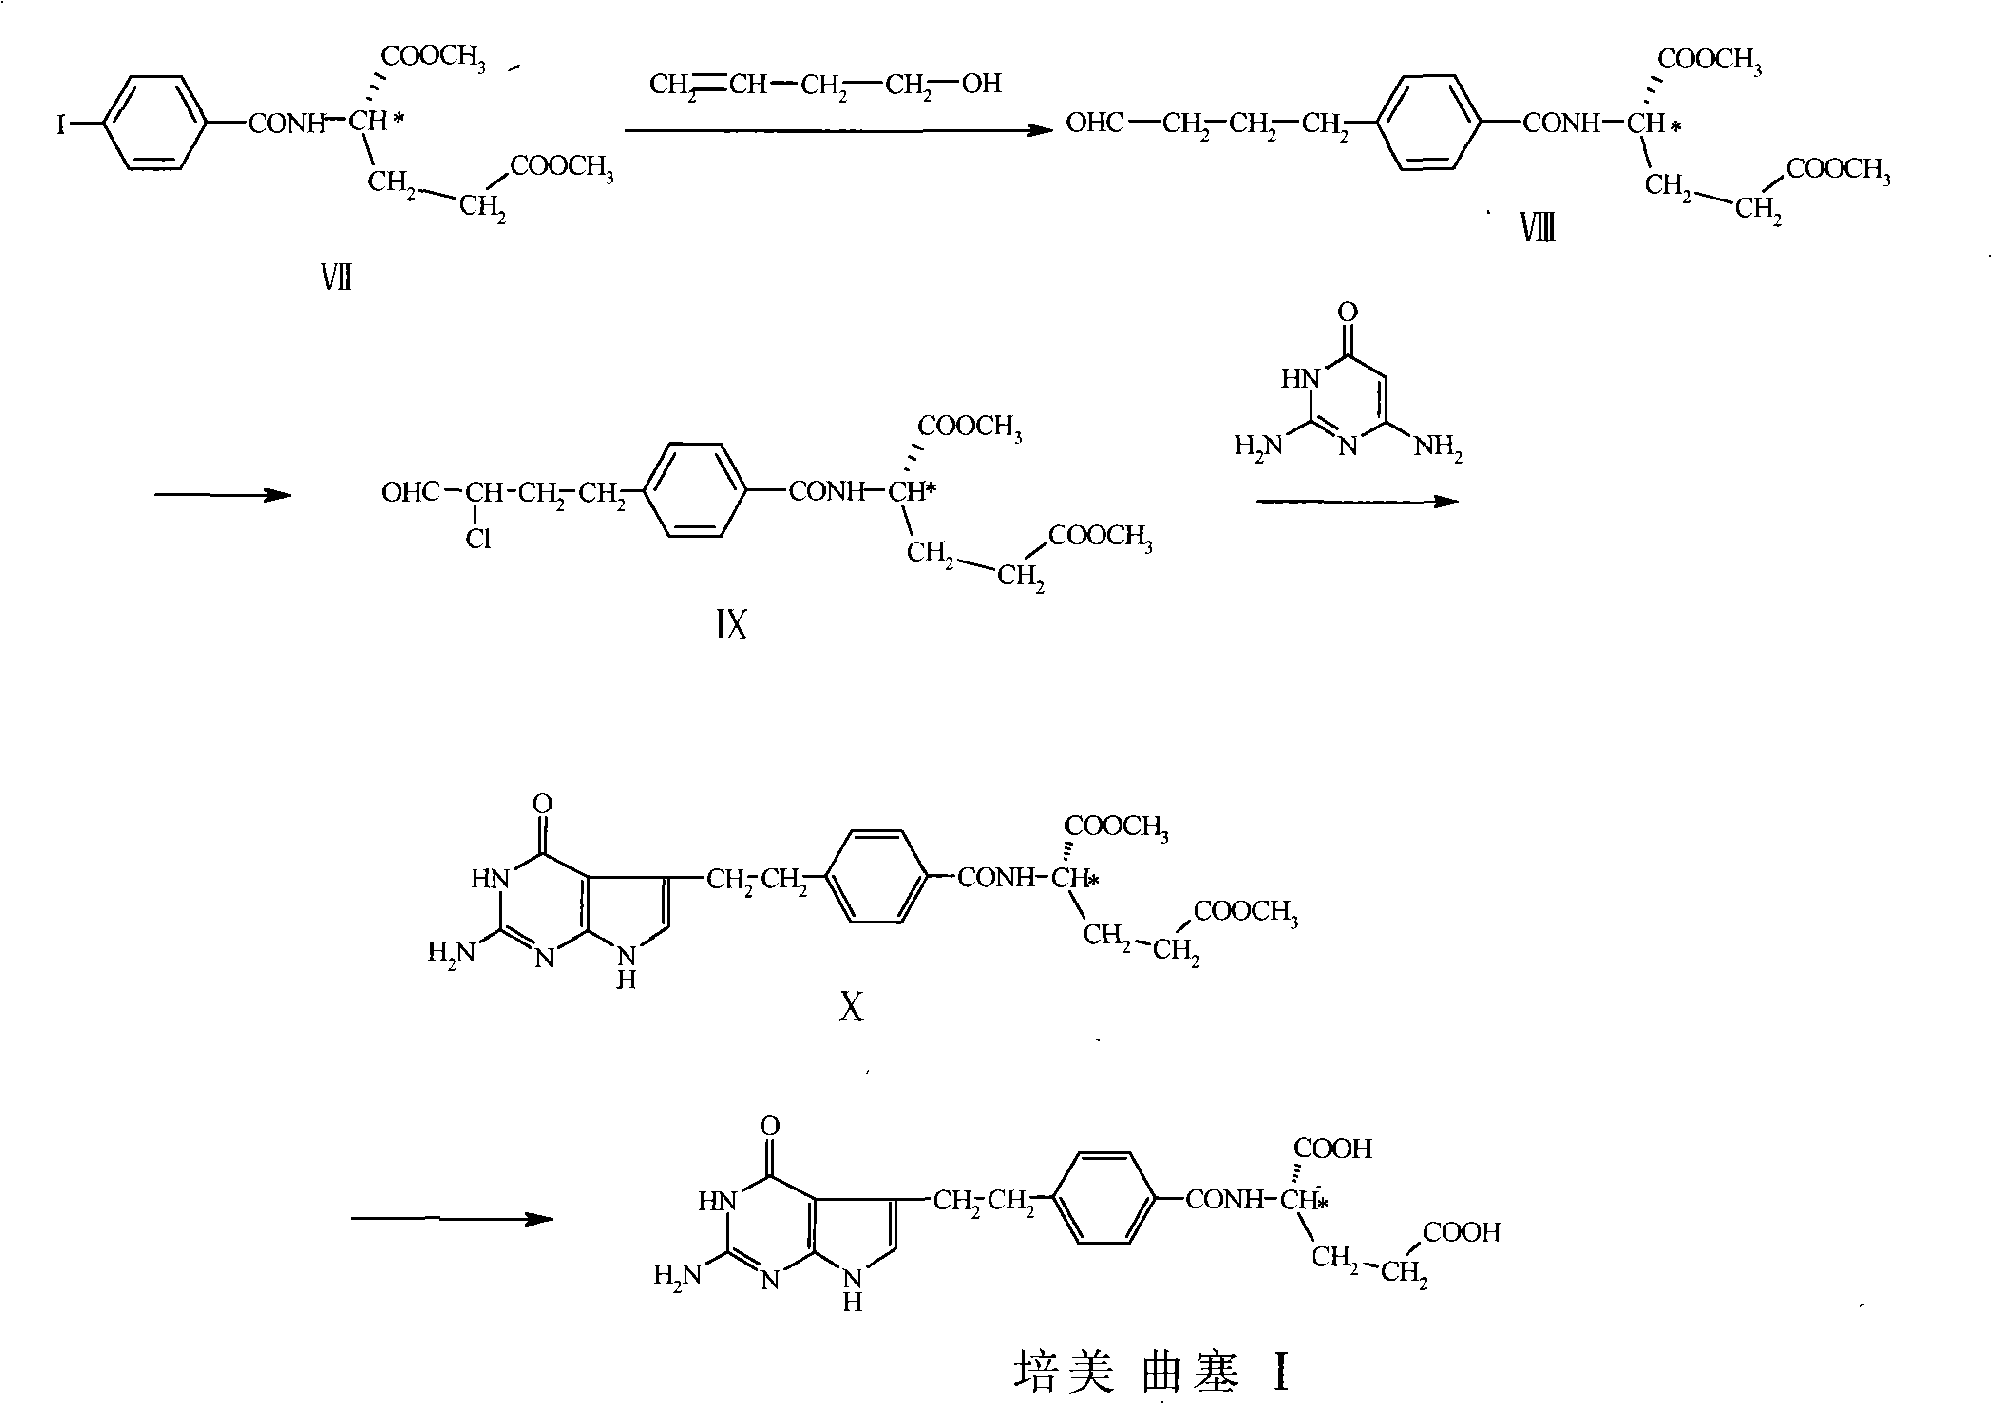 N-[4-(butanal-4-group)-benzoyl]-L-glutamic acid dimethyl ester compound and method for preparing pemetrexed by using the compounds